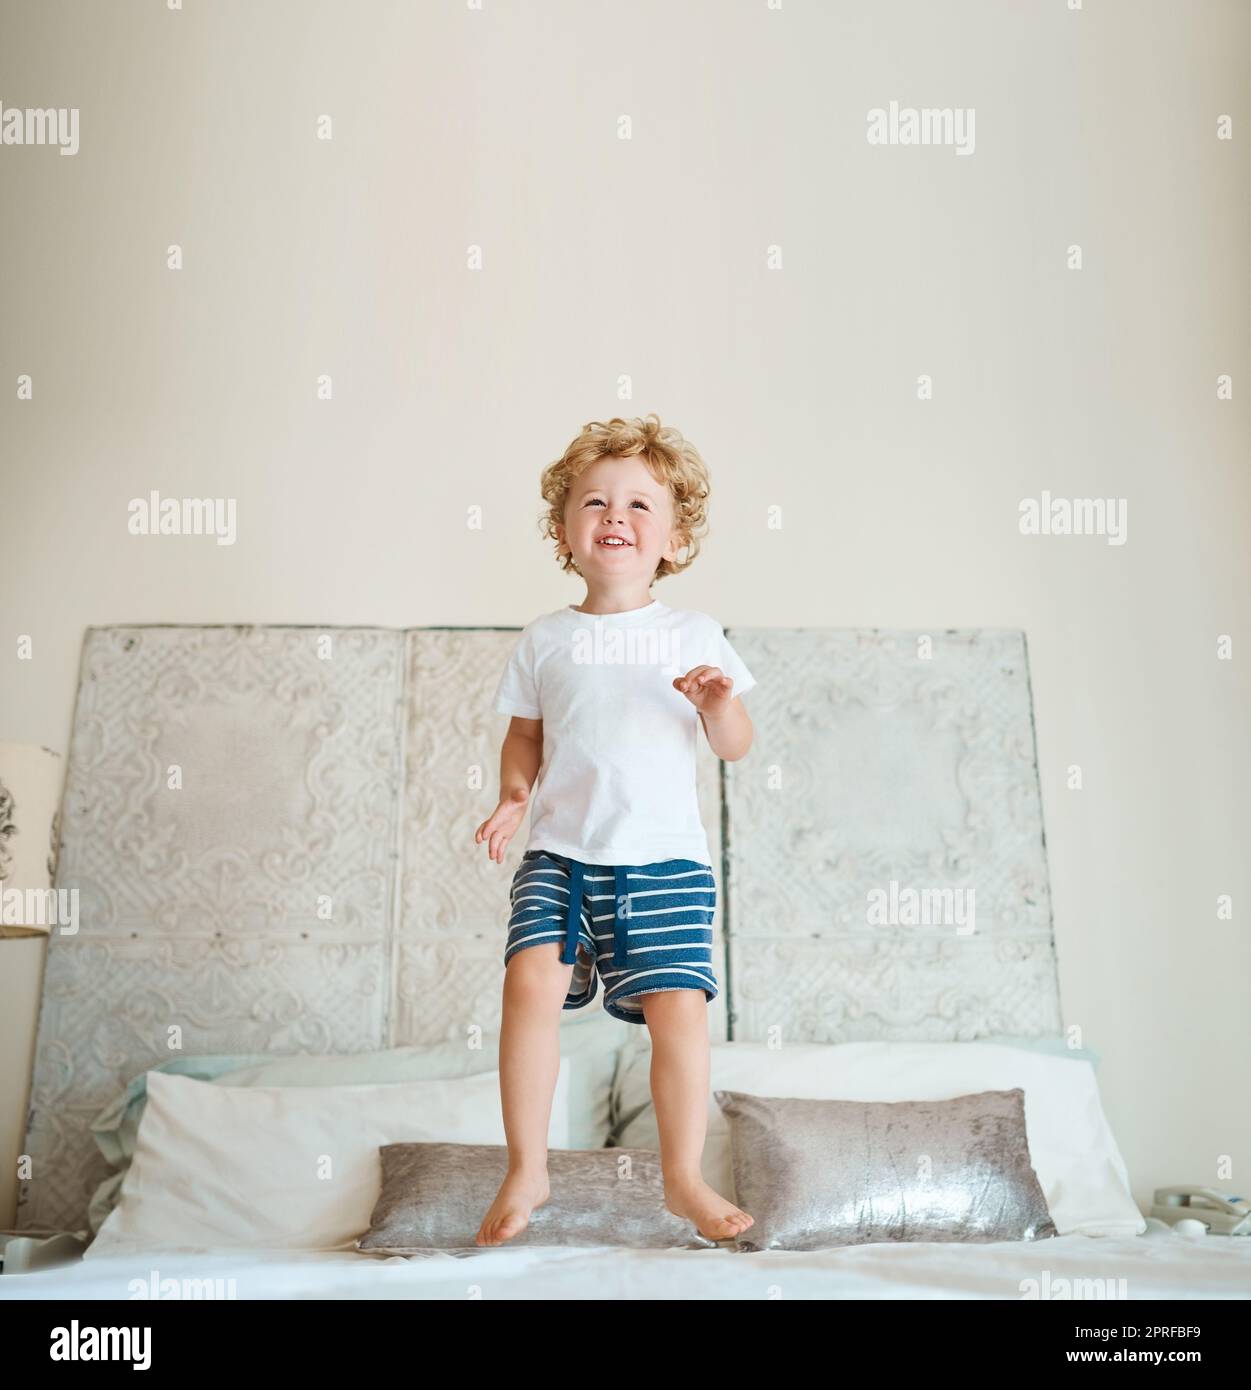 Such joy just jumping on a bed brings him. an adorable little boy jumping on the bed at home. Stock Photo